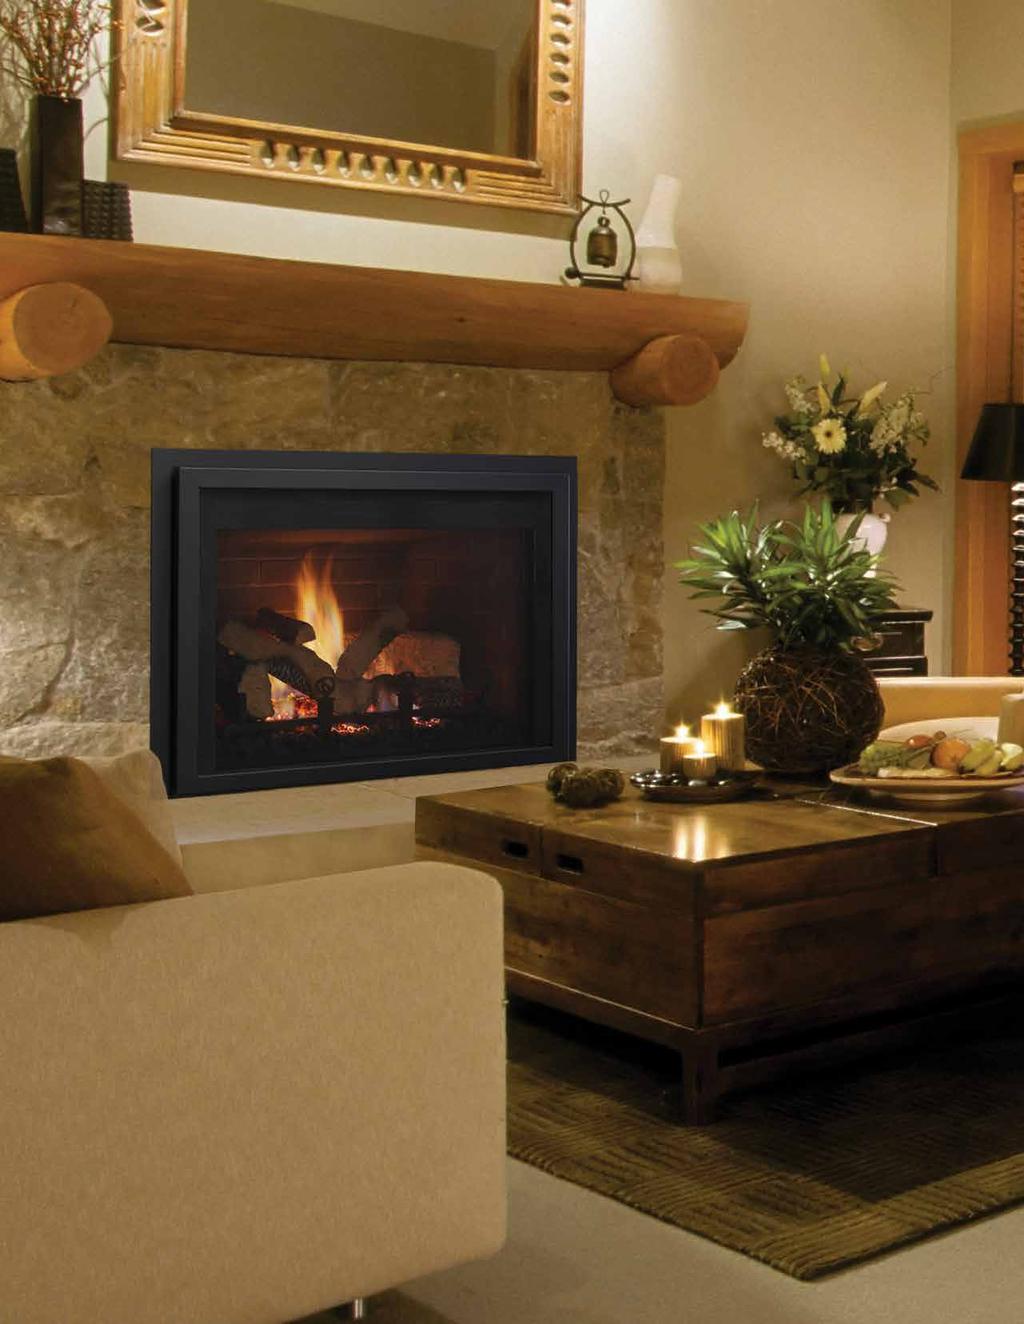 A New Fireplace insert In Four Easy Steps 1) Measure your existing fireplace 2) Select your